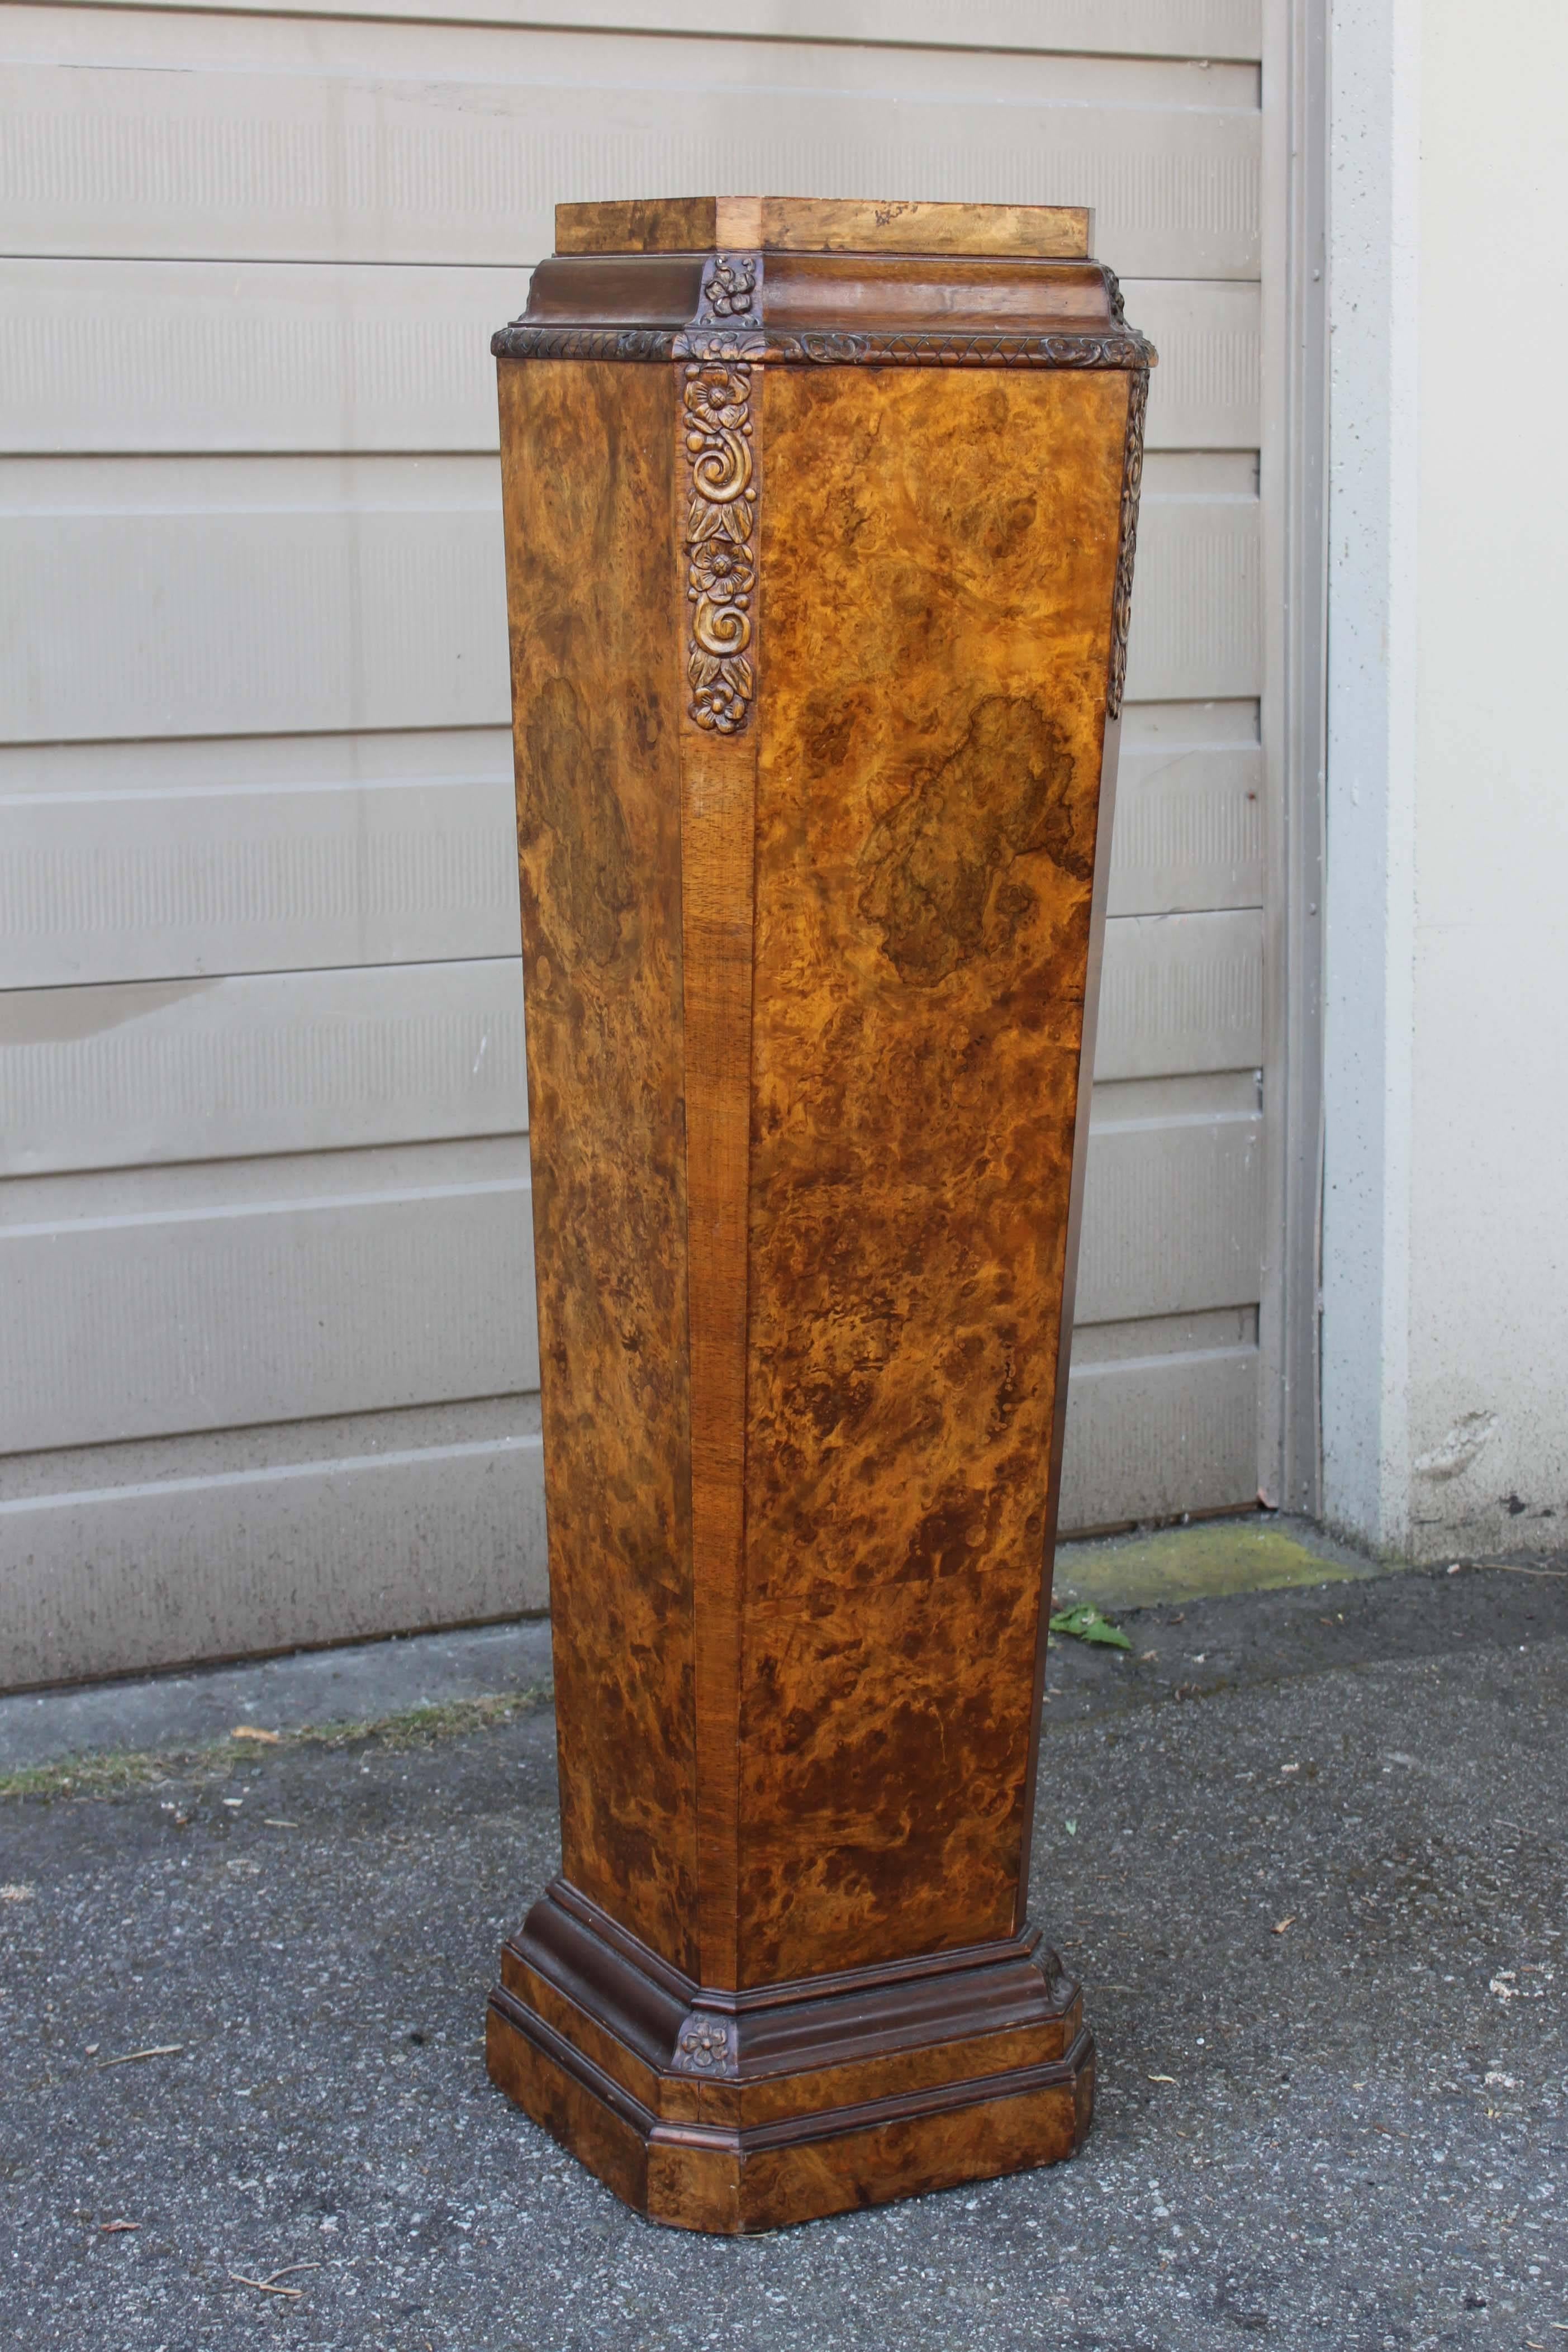 Pair of columns with burled walnut veneer and carved details.